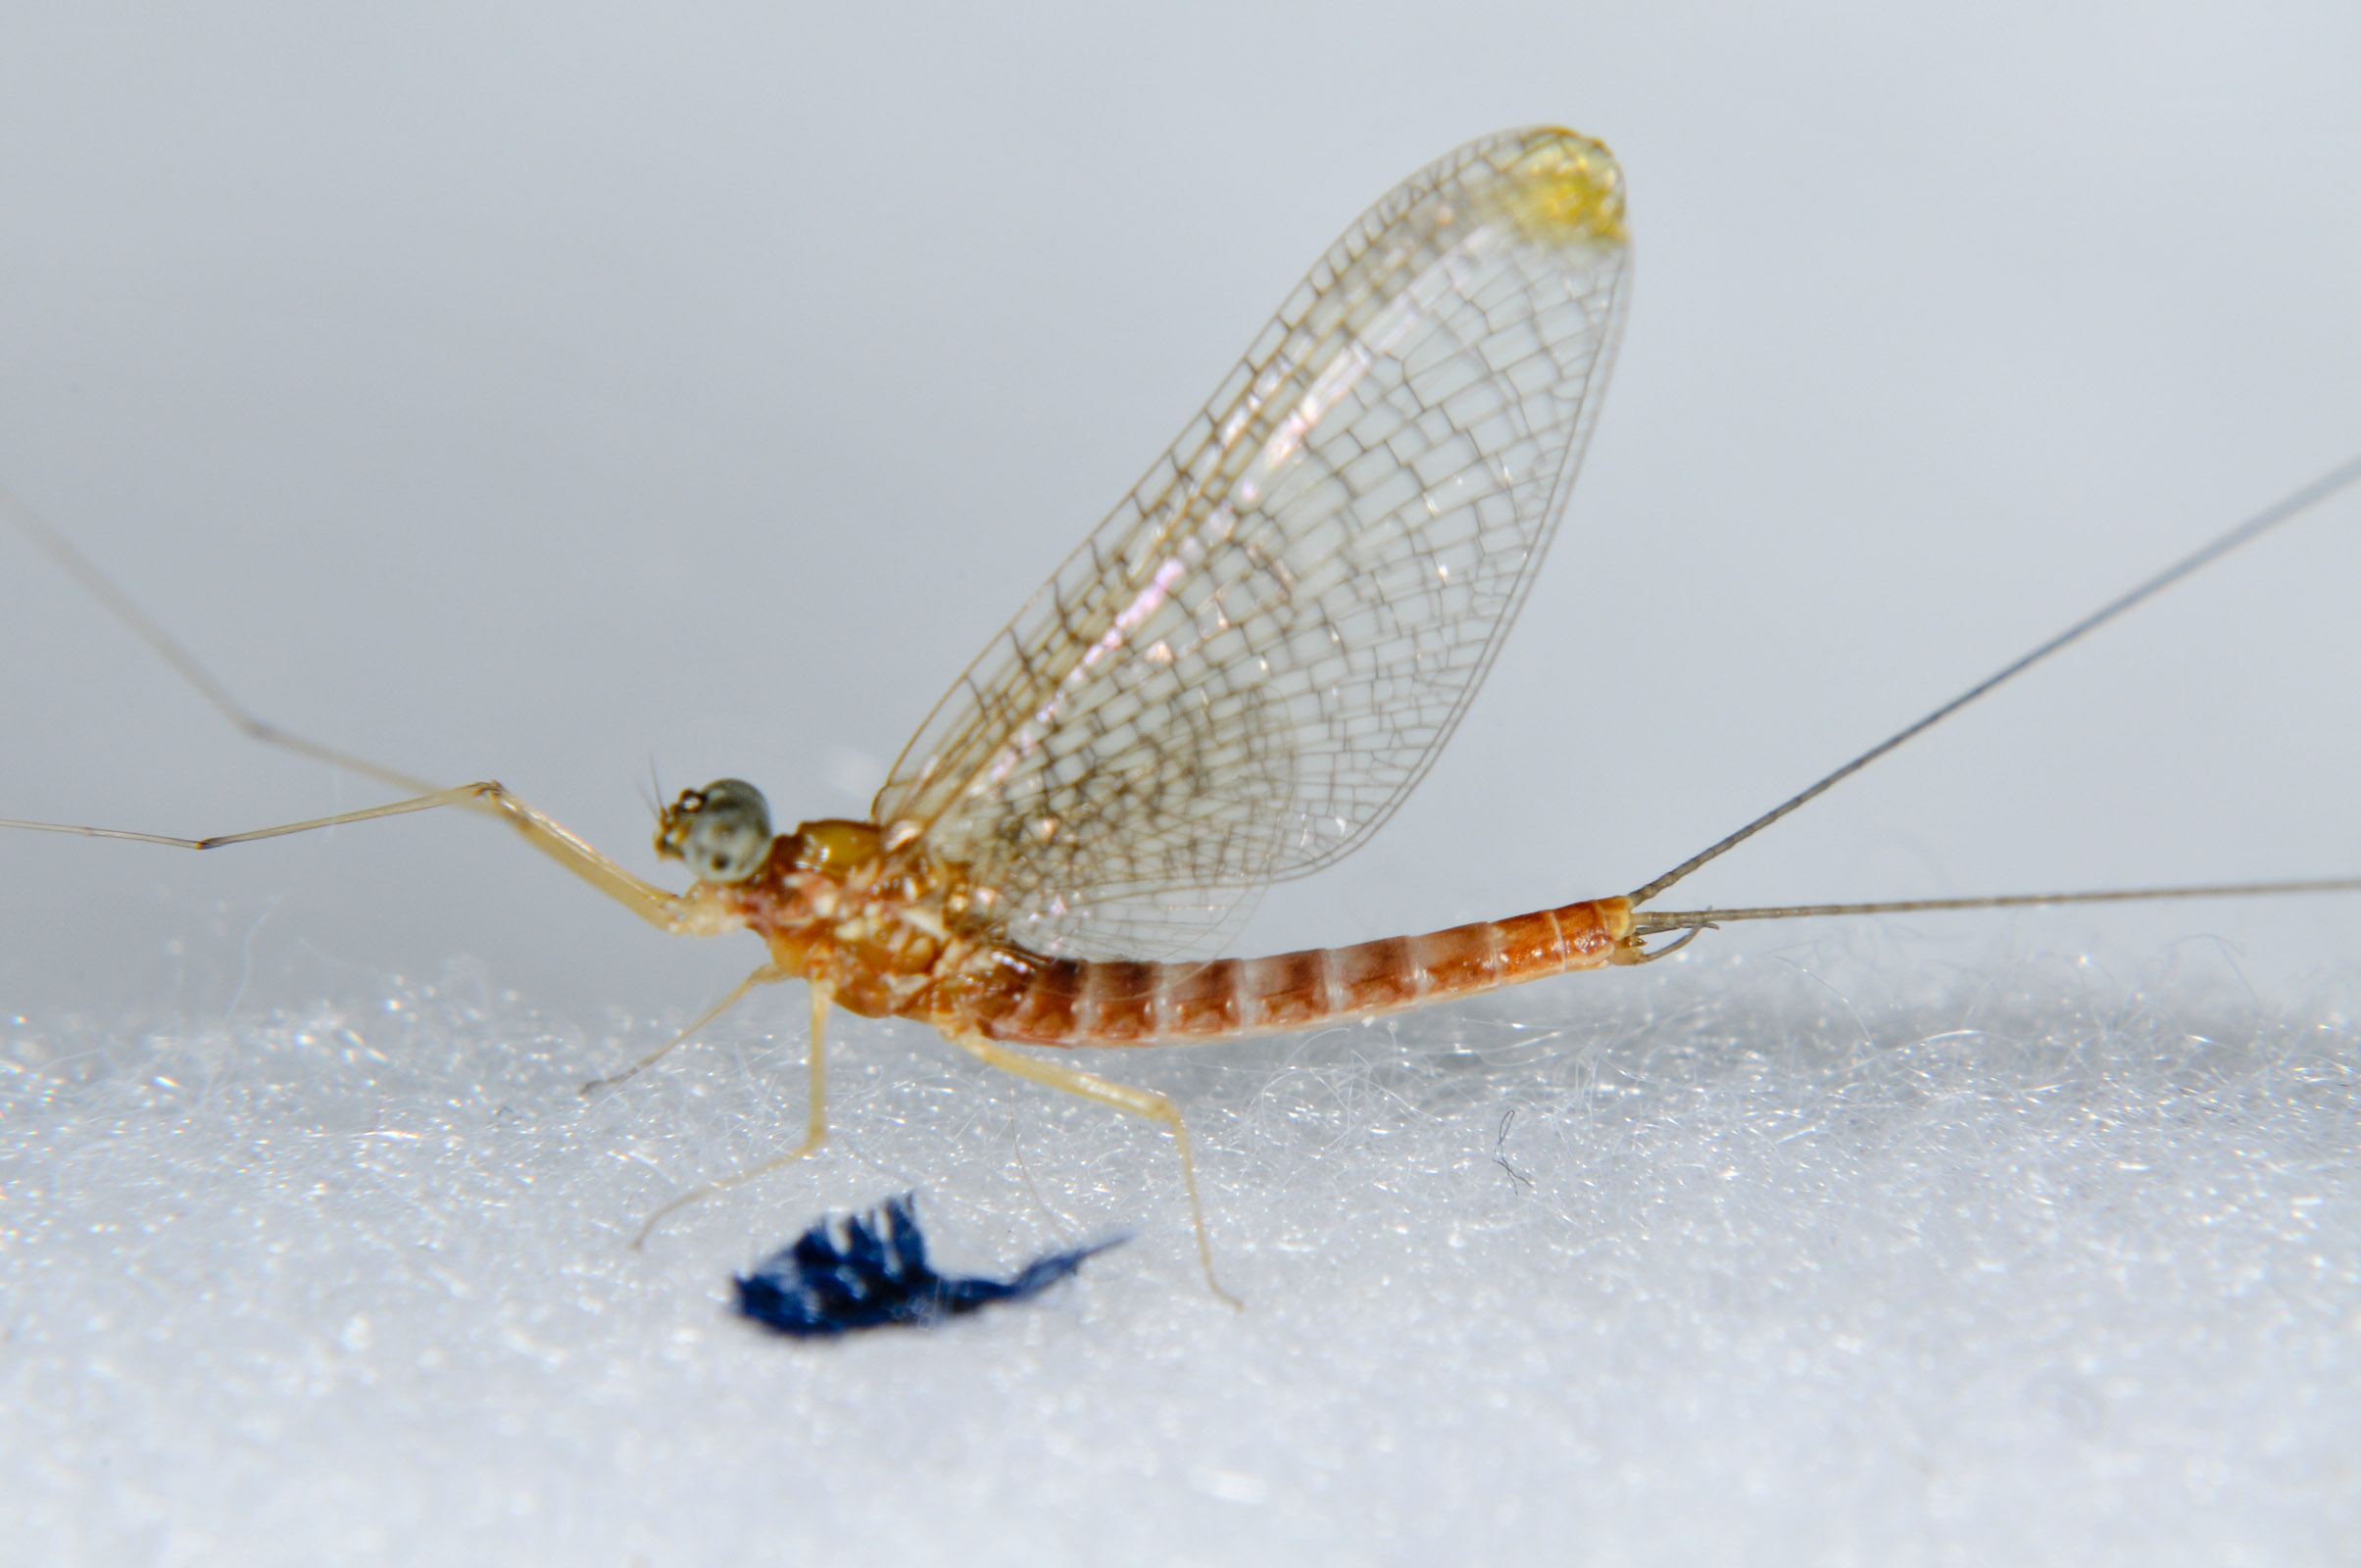 Male Cinygmula mimus Mayfly Adult from the  Touchet River in Washington